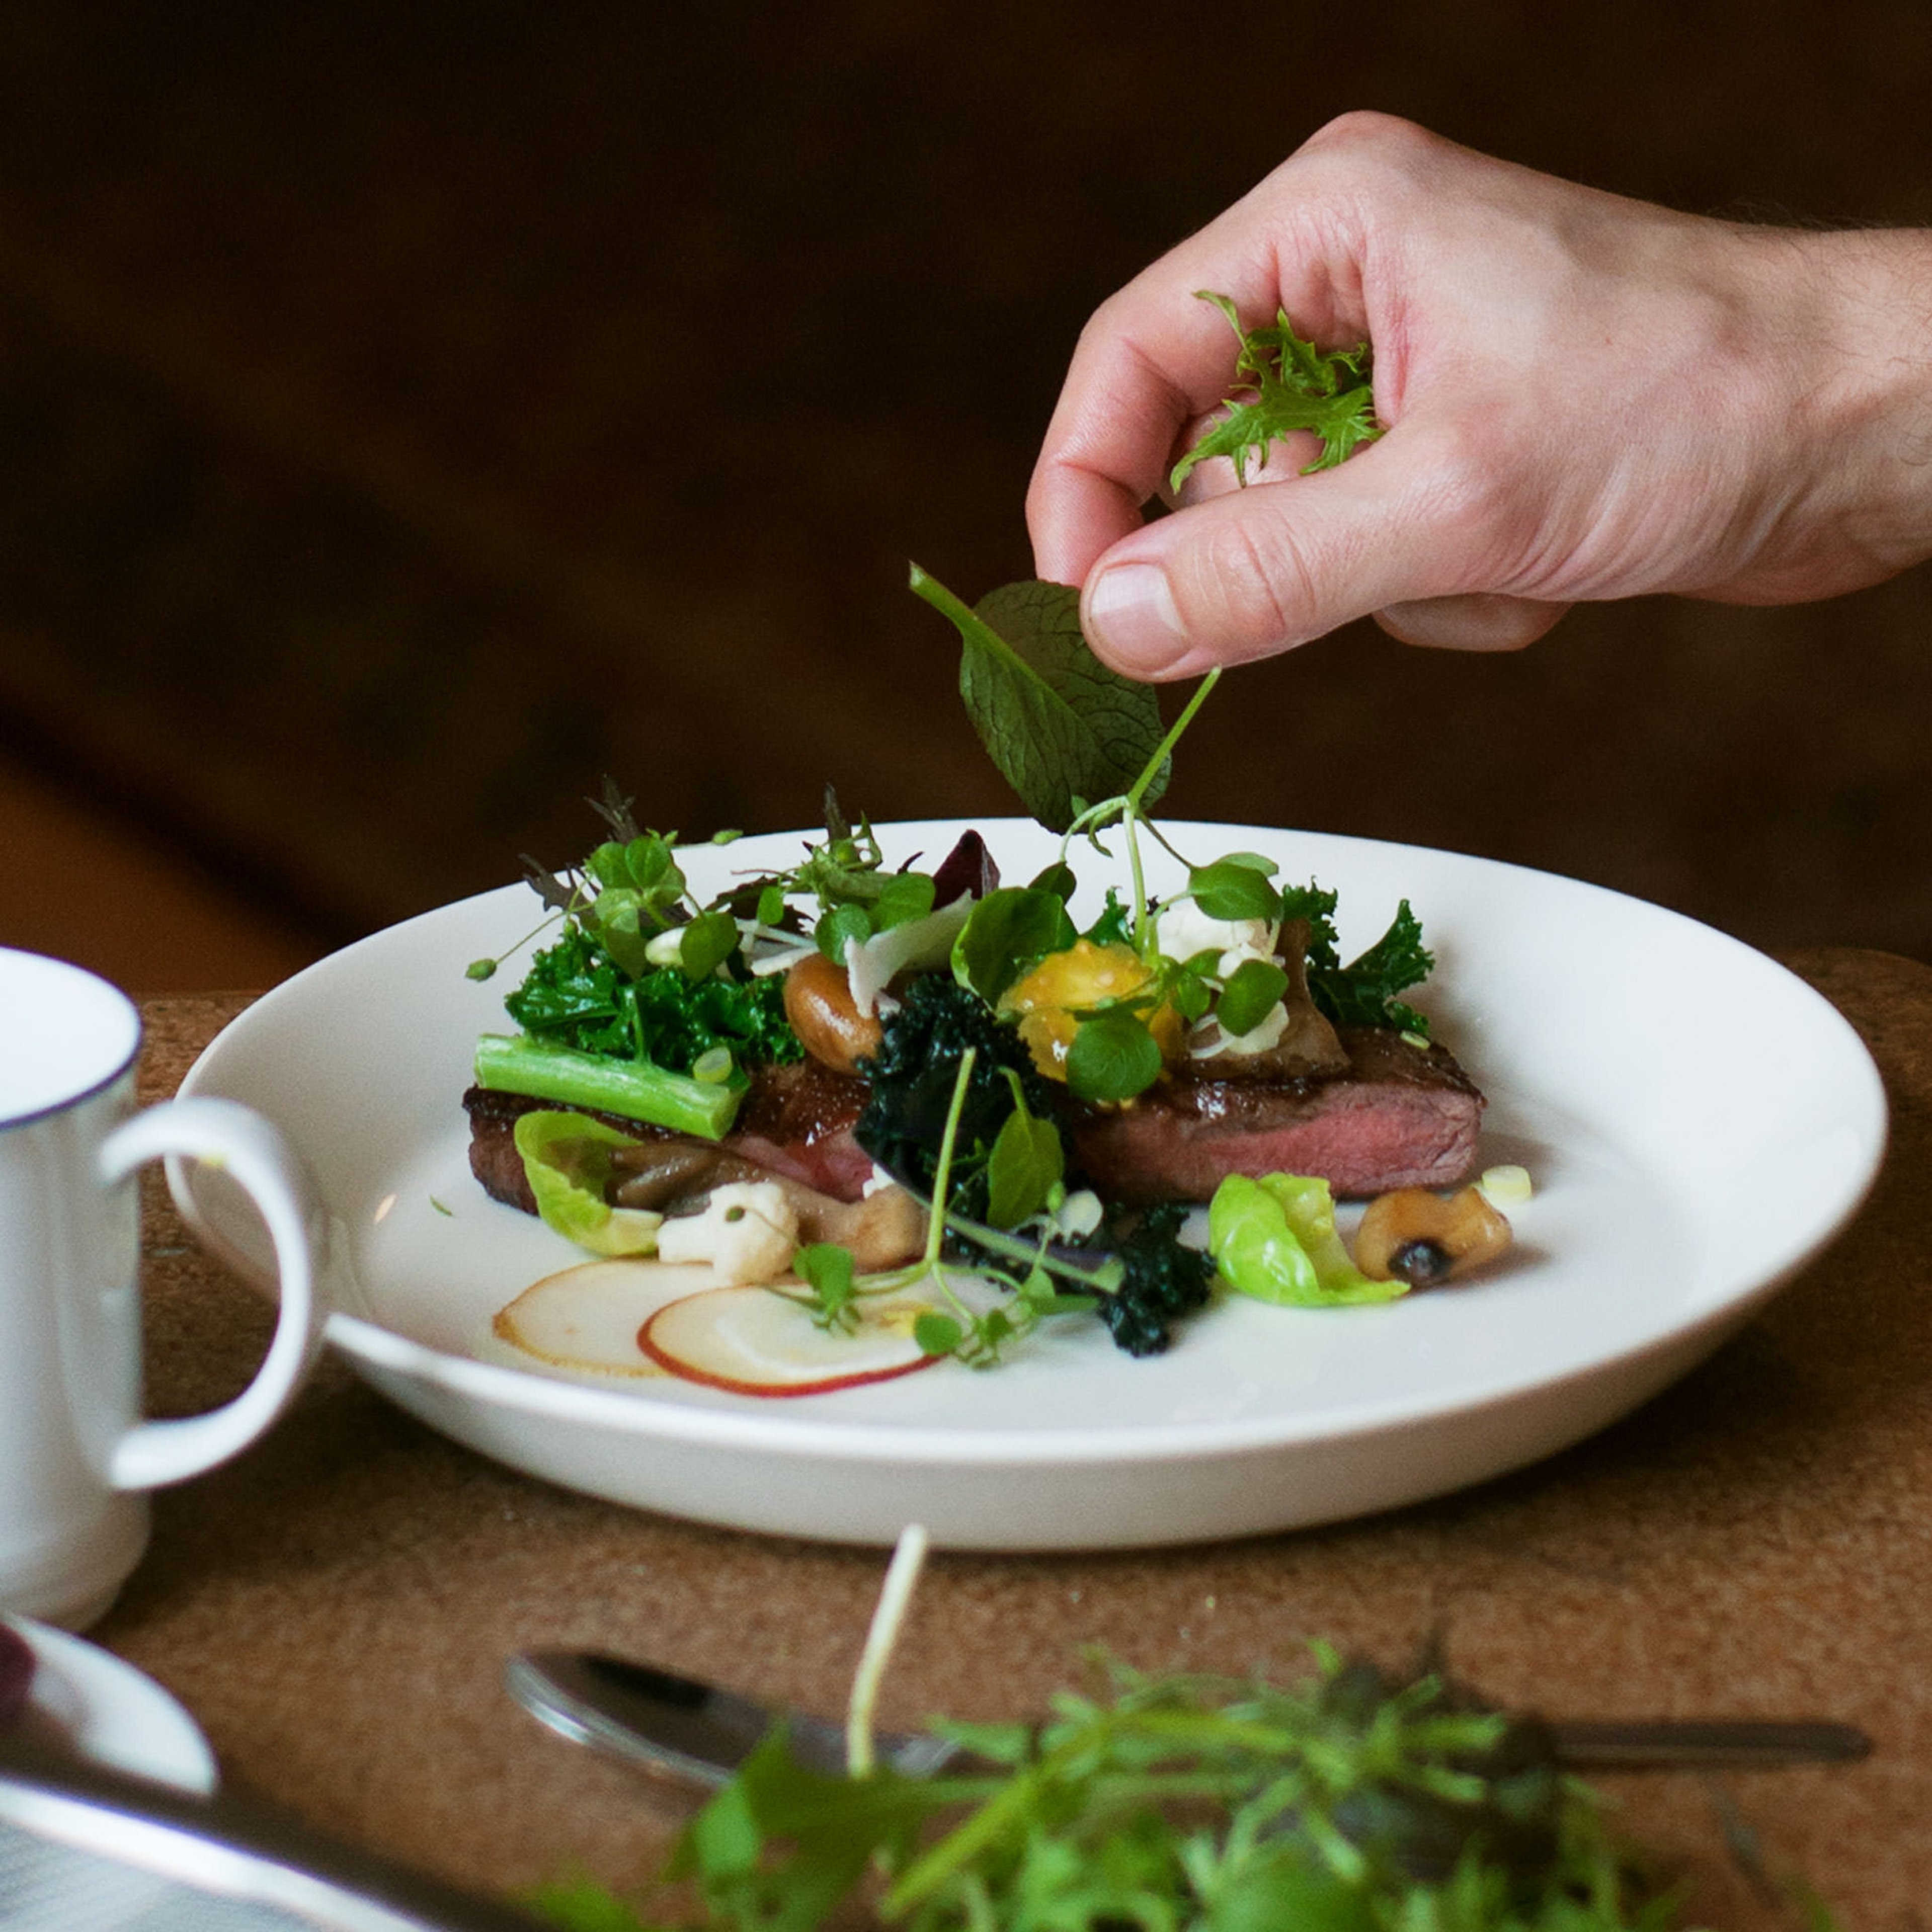 7 Tips for Artfully Plating Food